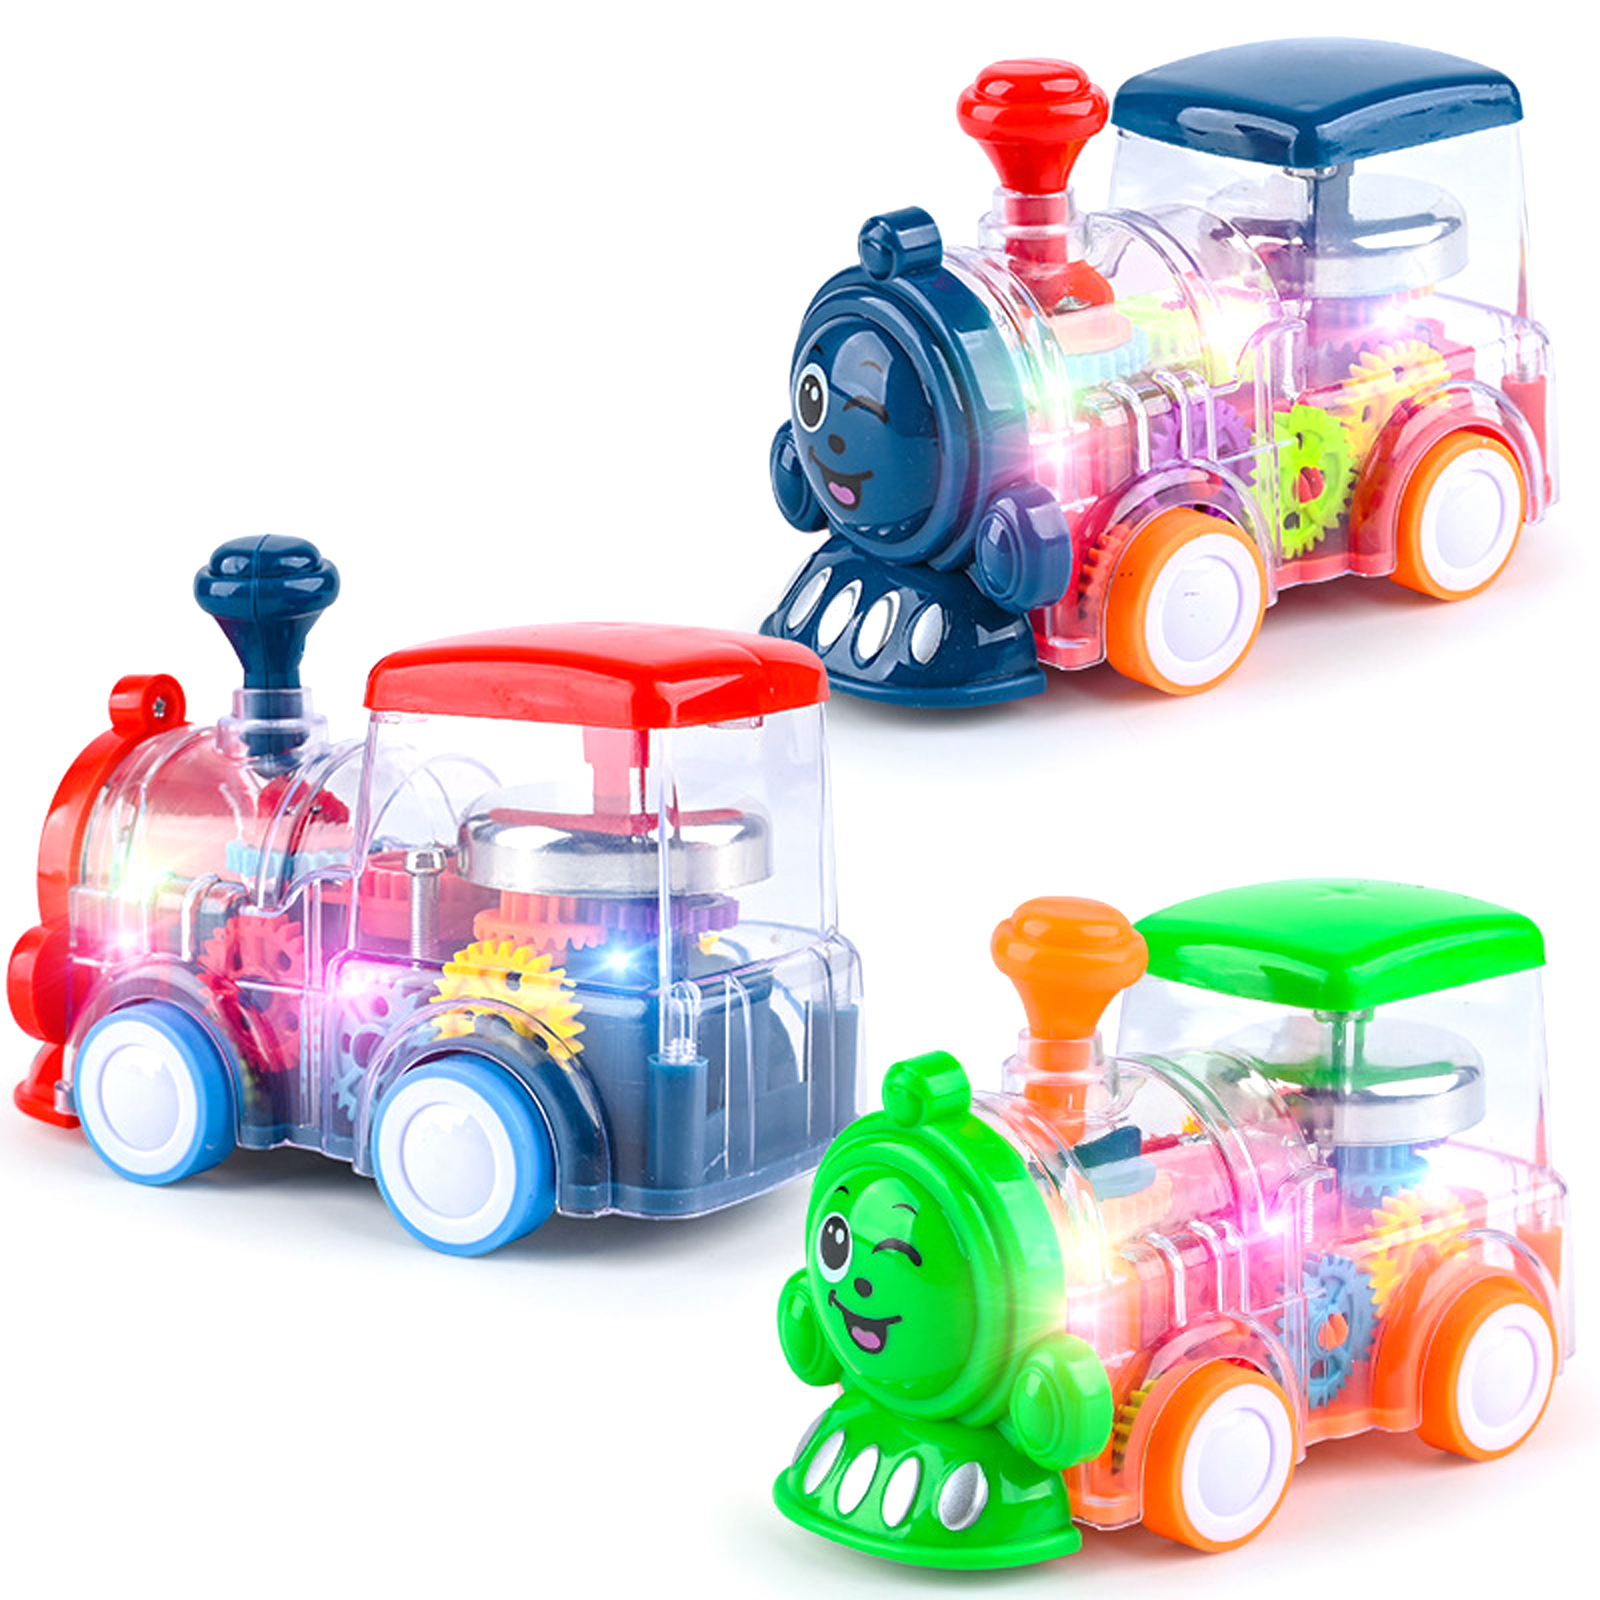 Light Up Transparent Car Toy For Kids 1:32 Electric Universal Inertia Car Toys With Colorful Moving Gears Music Light For Kids Birthday Gifts